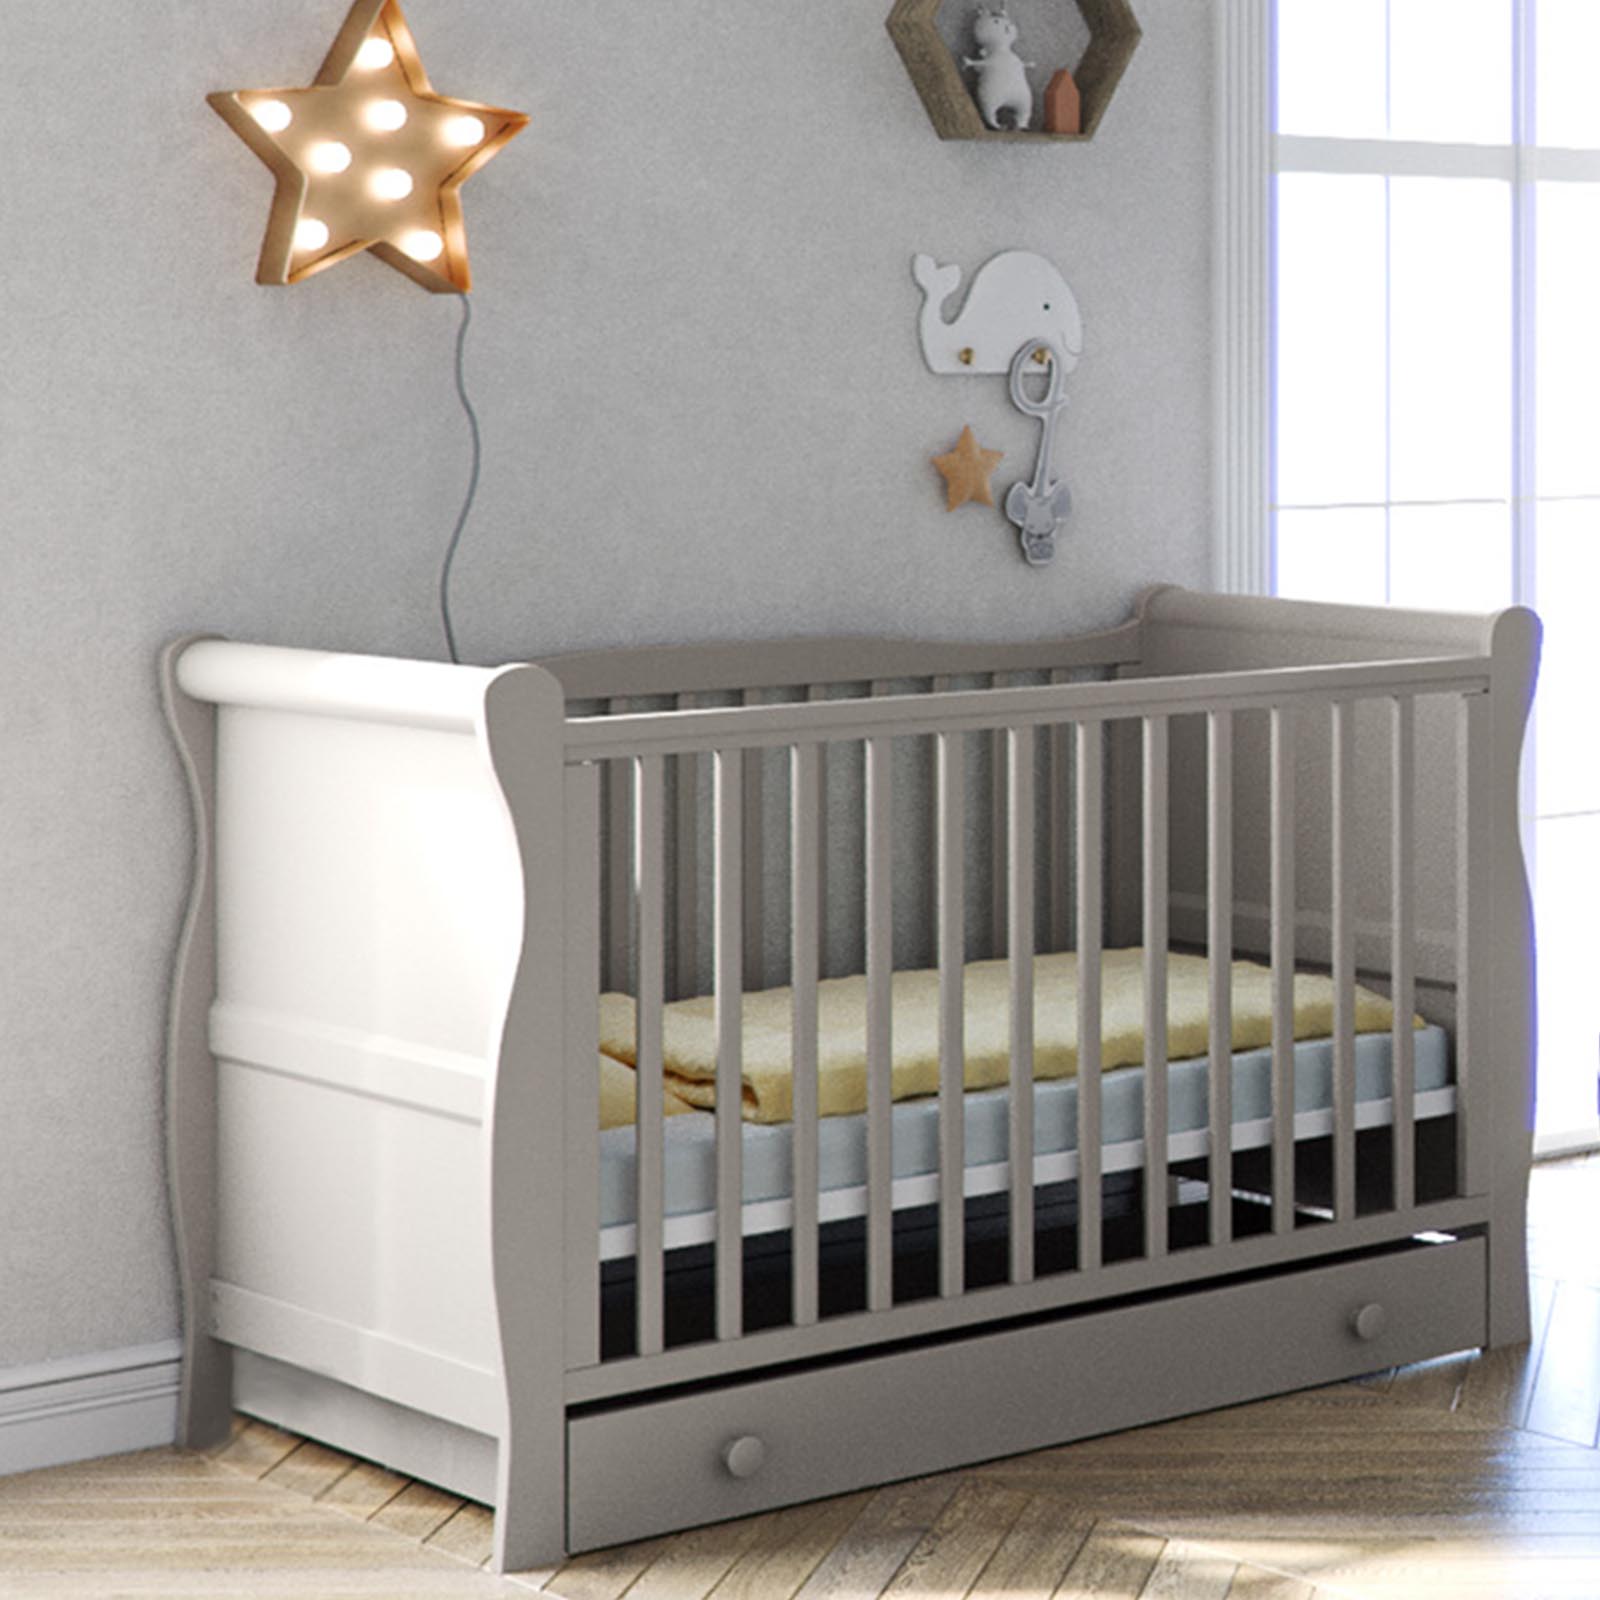 Little Acorns Sleigh Cot With Deluxe Eco Fibre Mattress & Drawer - Grey